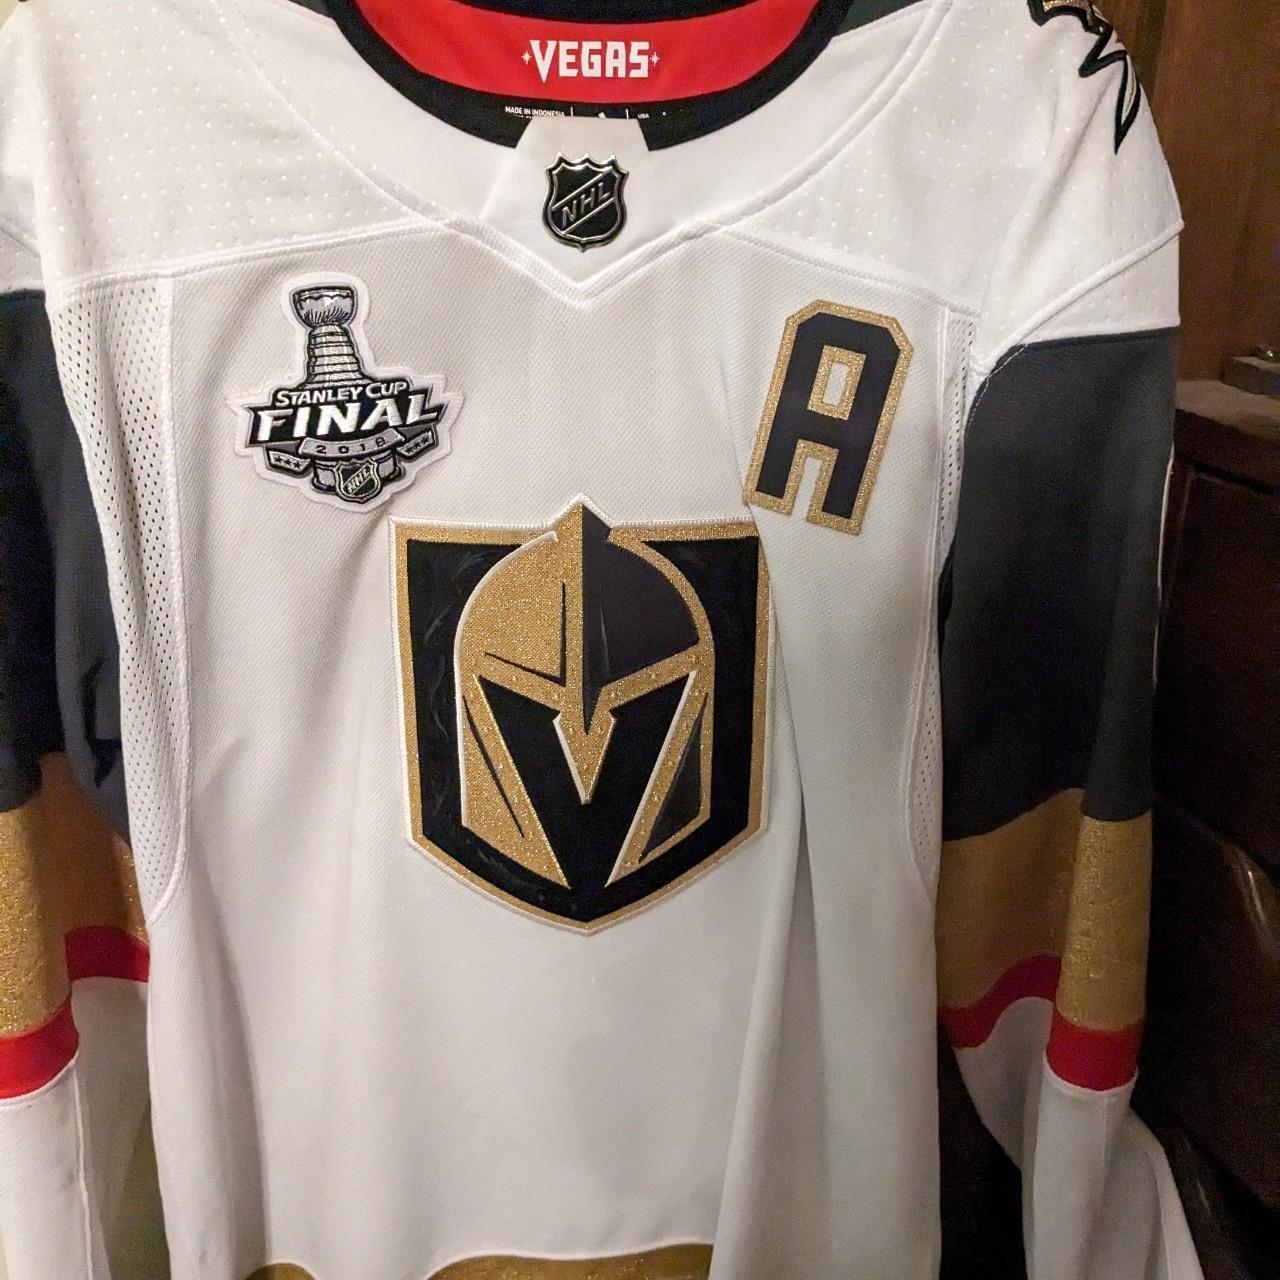 Adidas Men's White and Gold Top